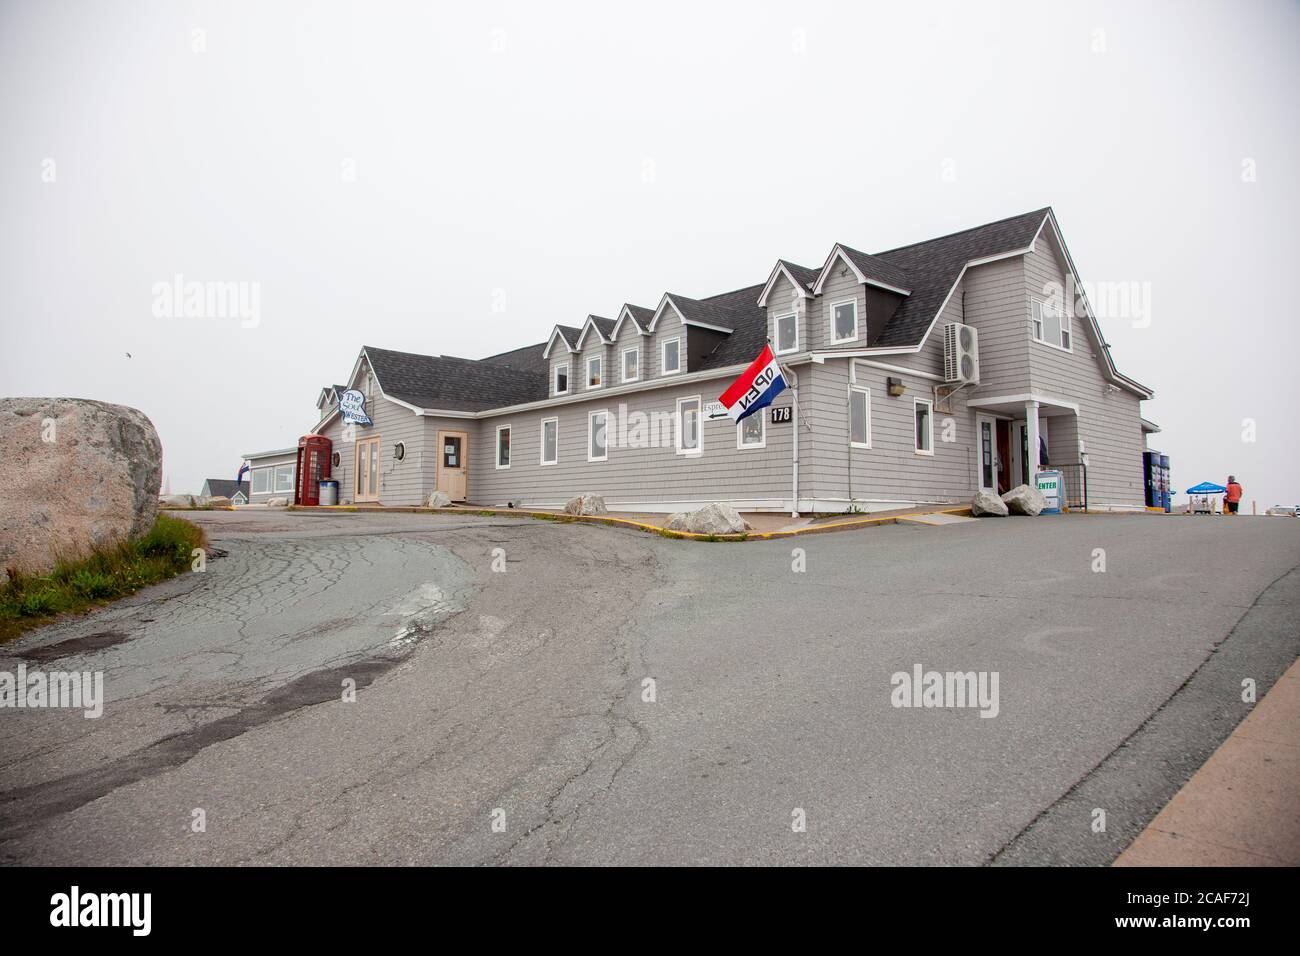 Halifax, Nova Scotia: July 19, 2020: The landmark Sou Wester restaraunt on a foggy day in the summer at the famous Peggy's Cove area Stock Photo